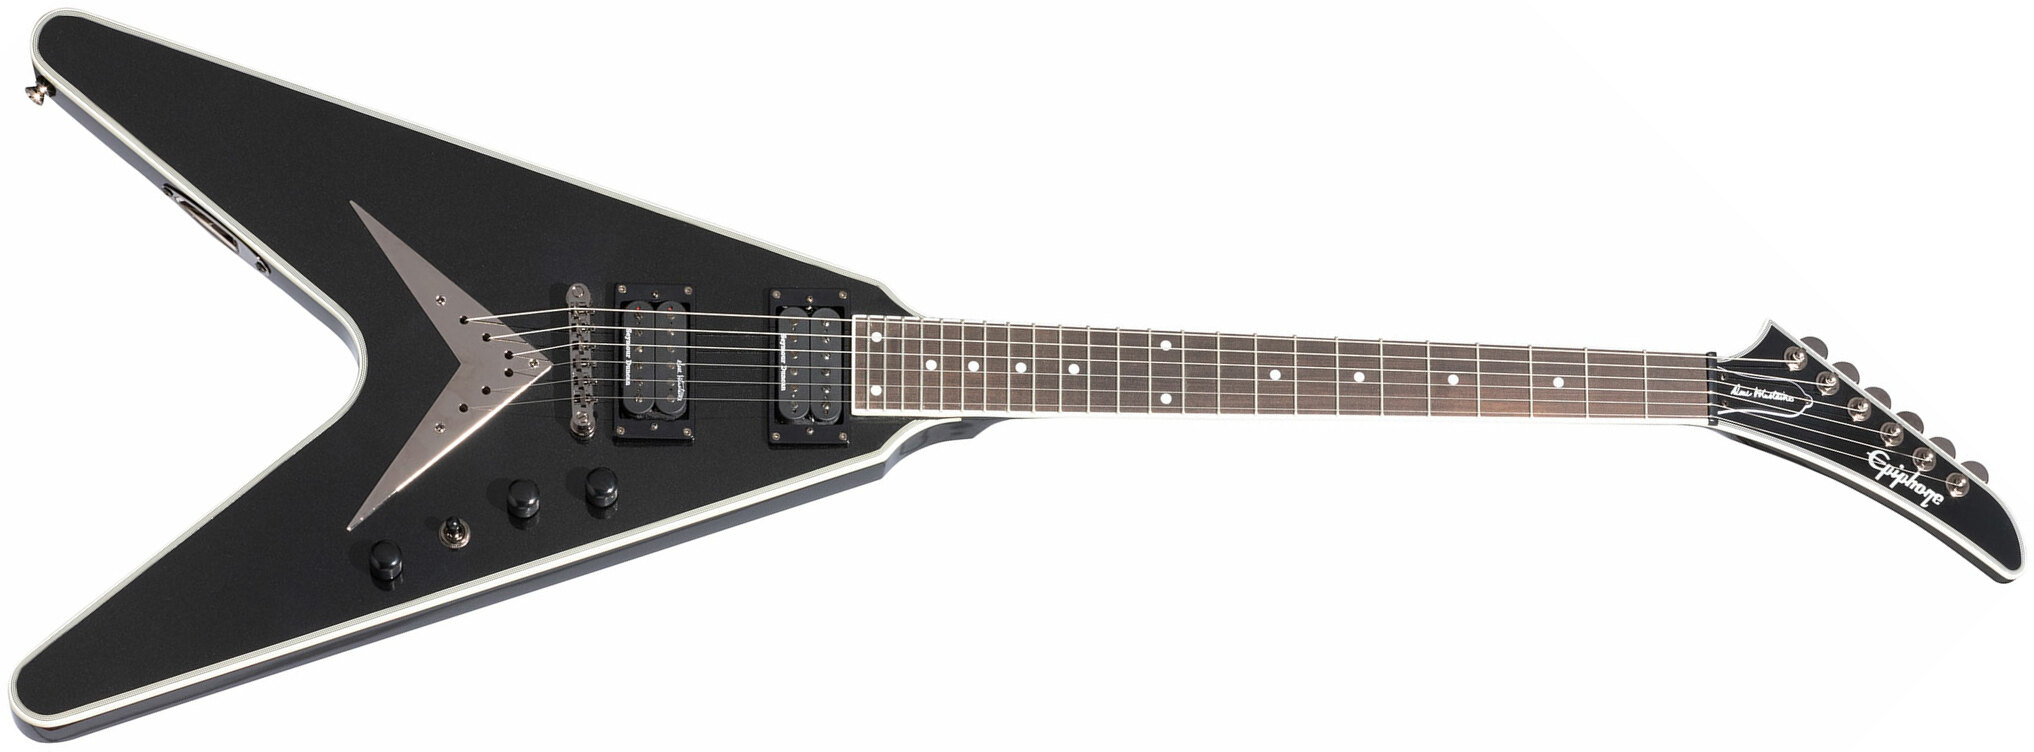 Epiphone Dave Mustaine Flying V Prophecy 2h Fishman Fluence Ht Eb - Black Metallic - E-Gitarre aus Metall - Main picture